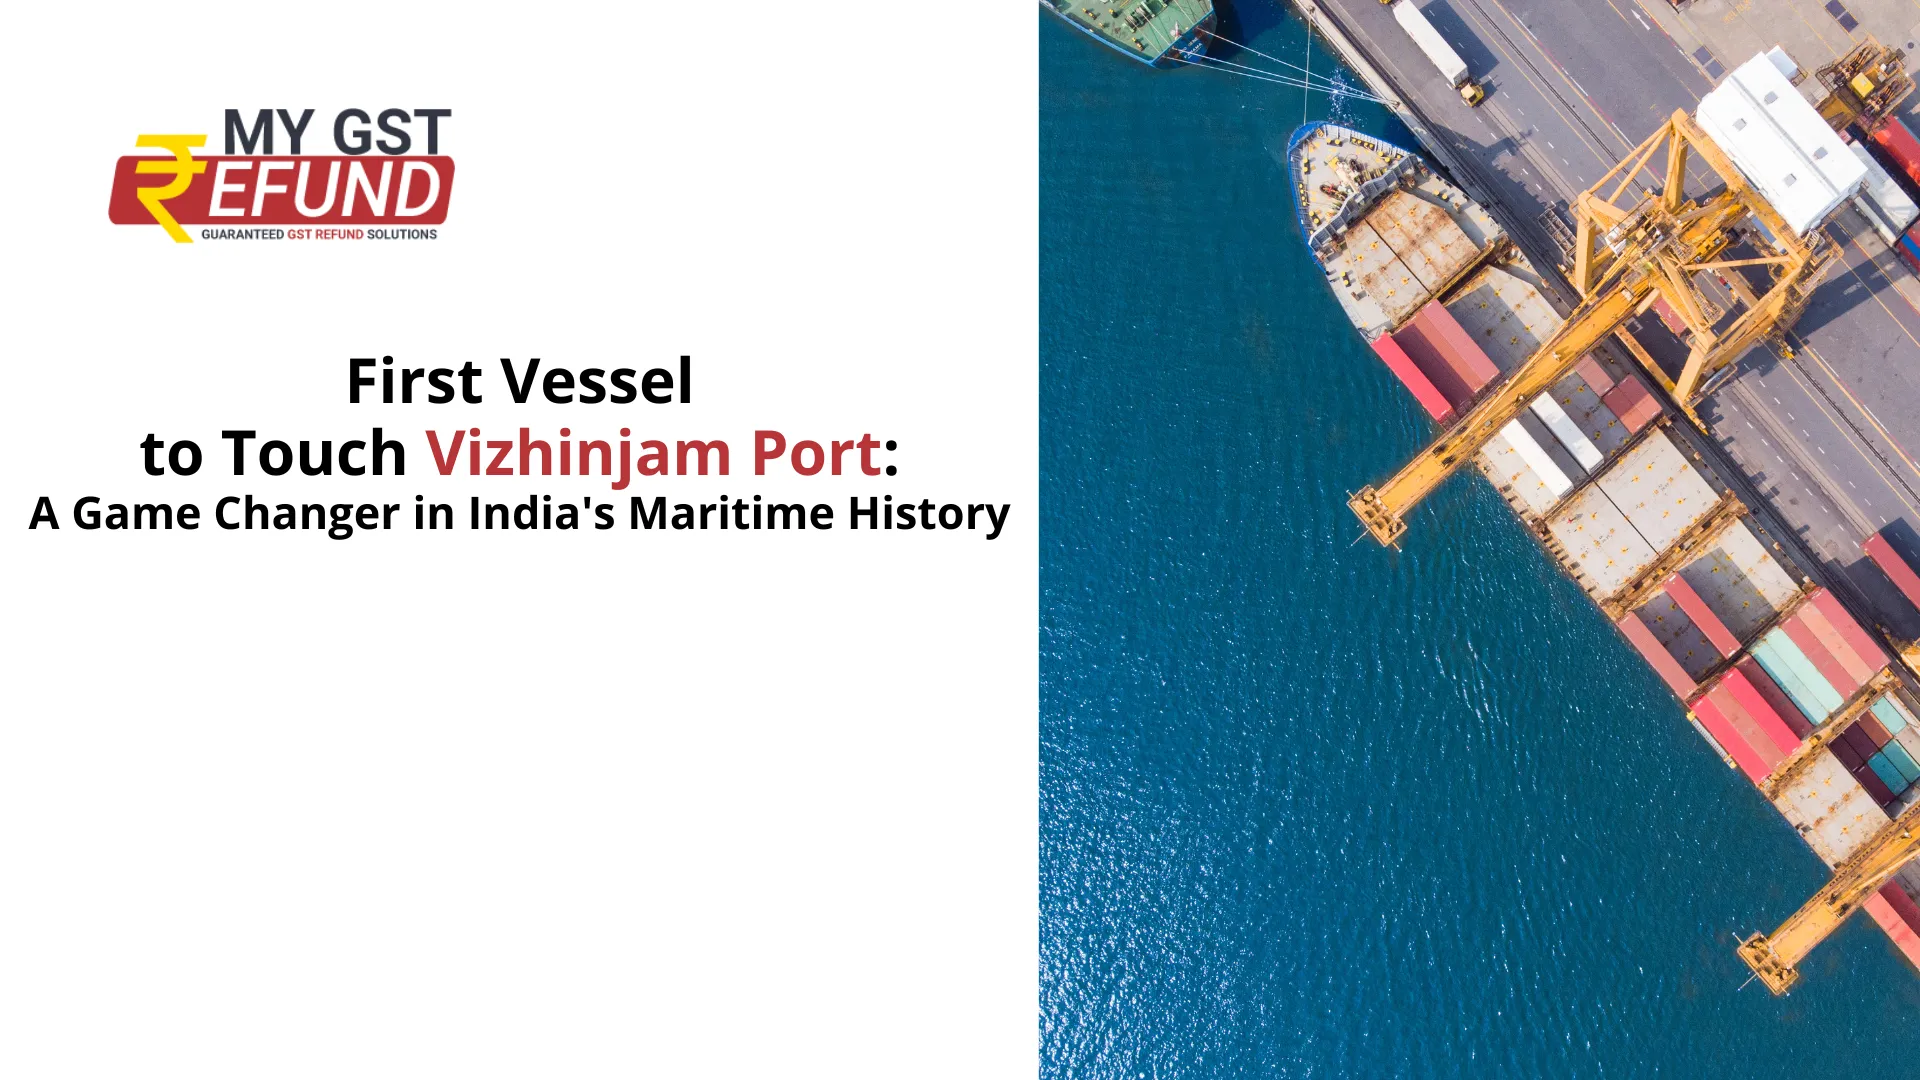 First Vessel to Touch Vizhinjam Port: A Game Changer in India's Maritime History